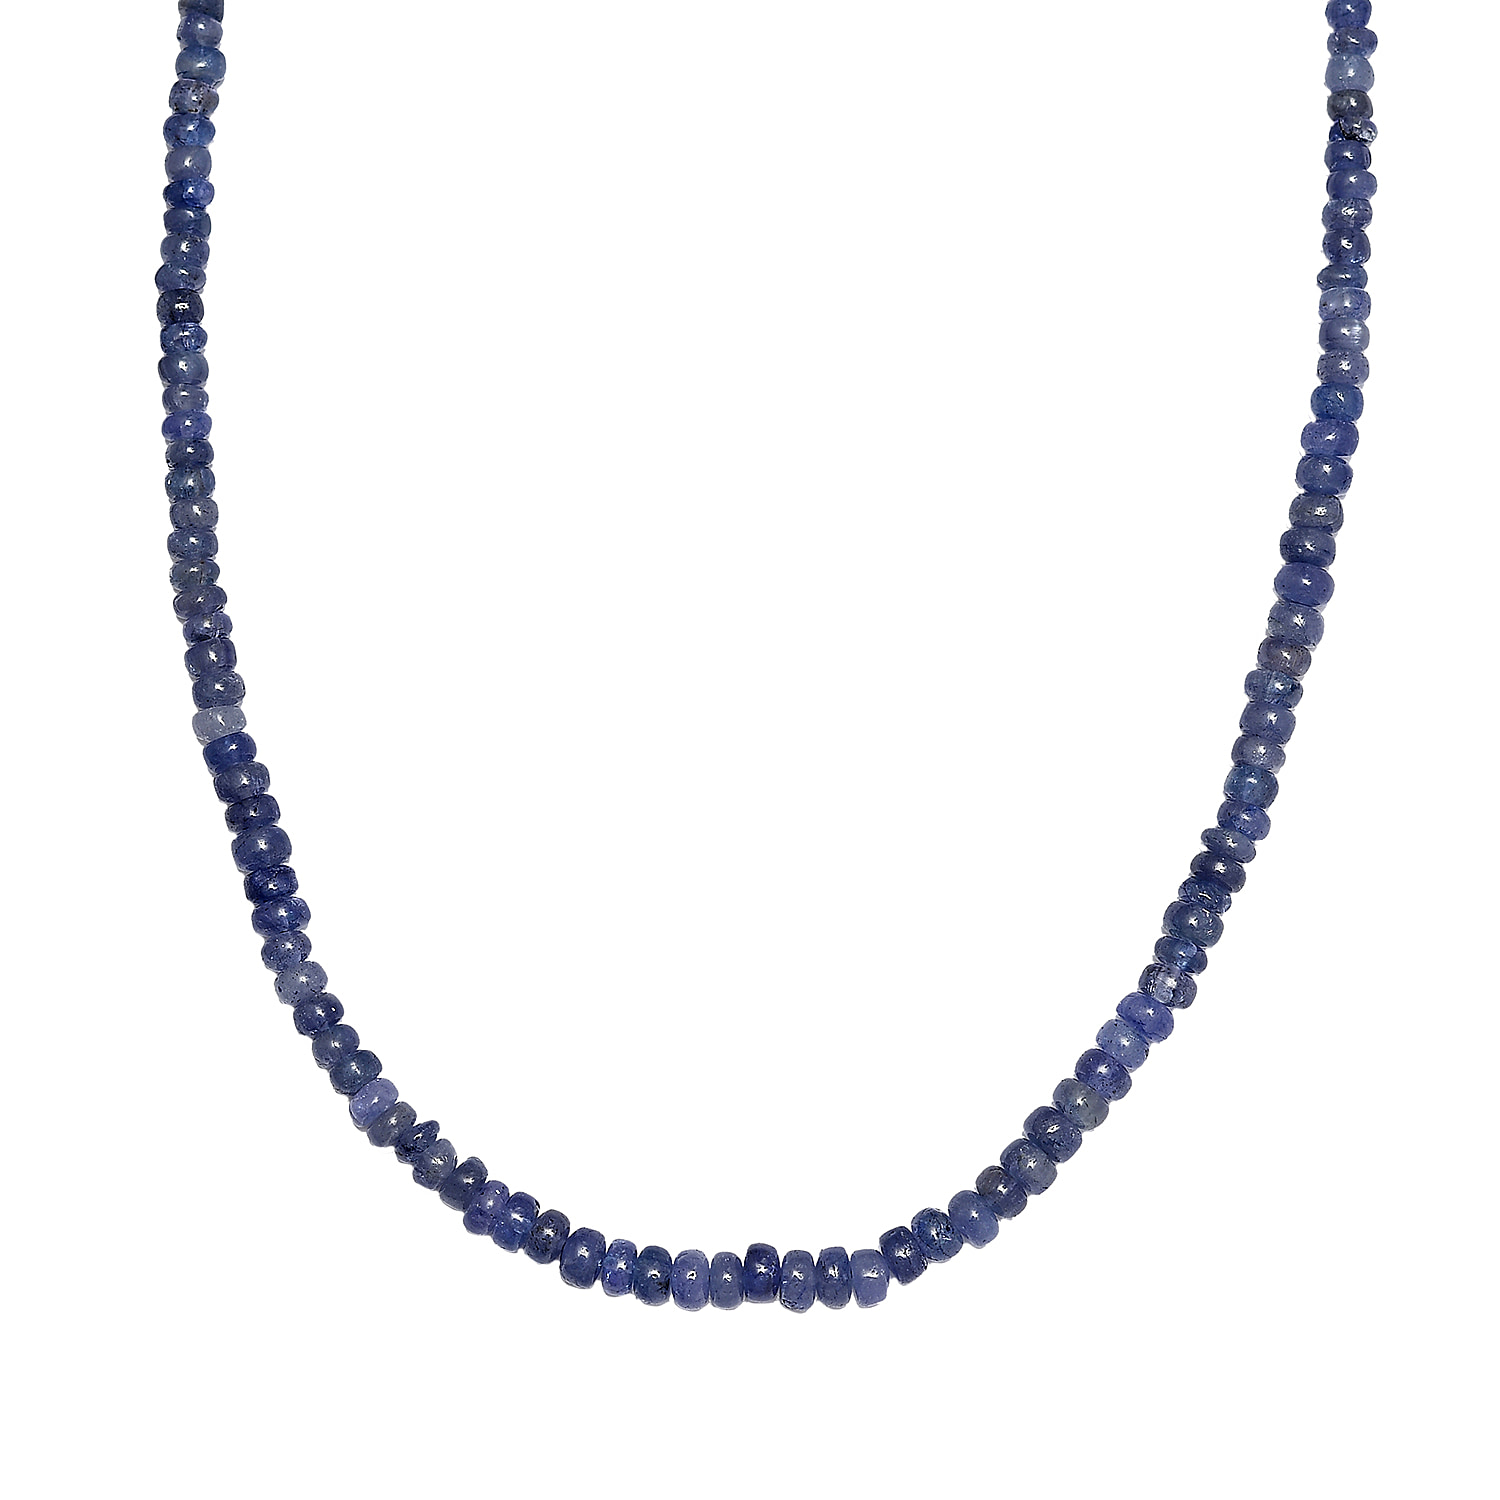 Tanzanite Beads Necklace (Size - 20) in 18K Vermeil Yellow Gold Plating Sterling Silver 125.00 ct 125.000 Ct.